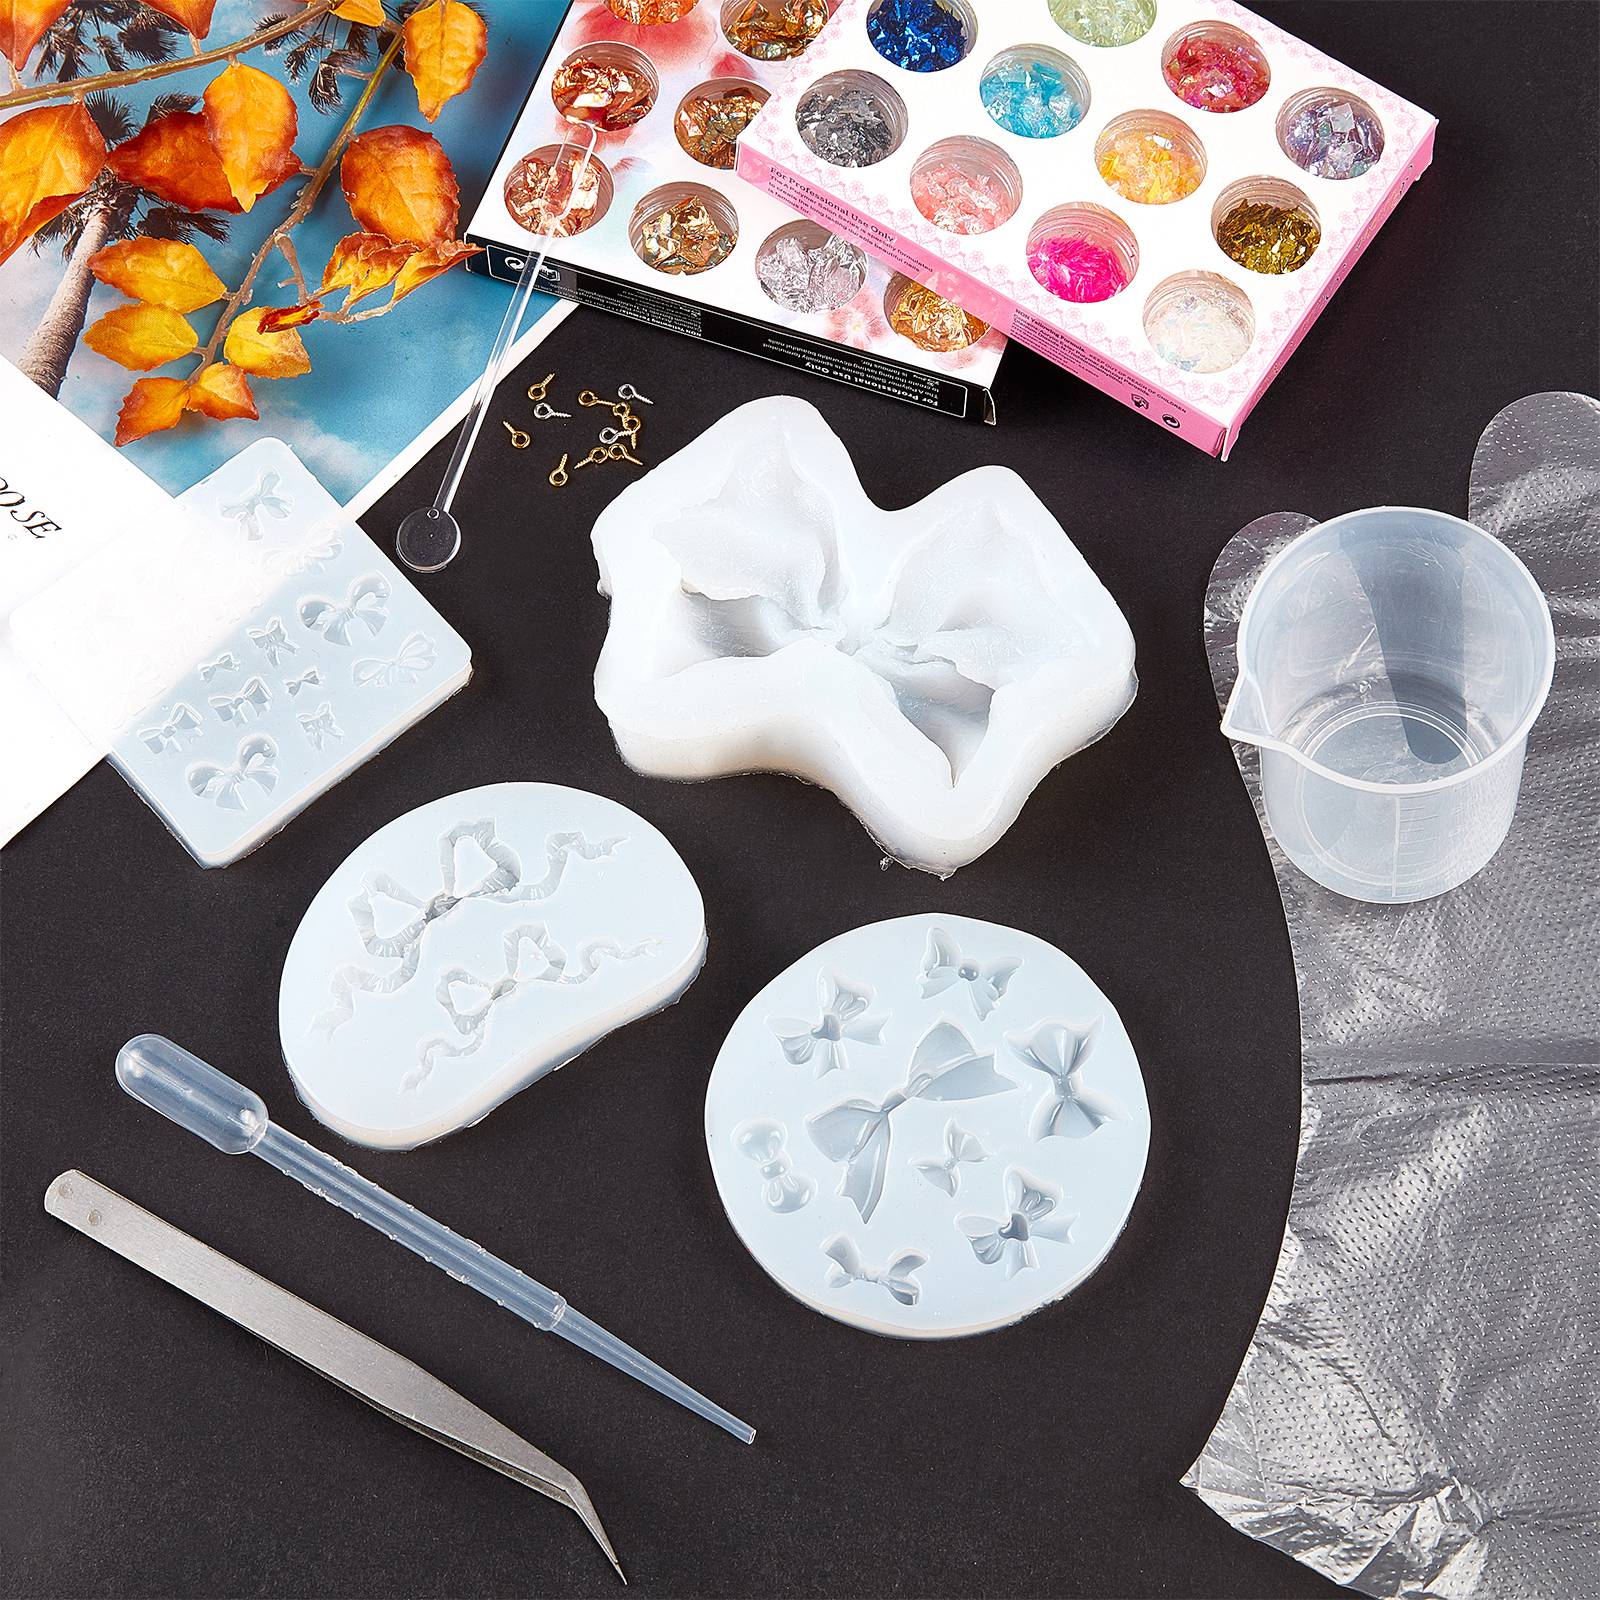 CRASPIRE DIY Bowknot Silicone Molds Kits, with Resin Casting Molds, Iron  Screw Eye Pin Peg Bails, 304 Stainless Steel Beading Tweezer, Measuring  Cup, Nail Art Sequins/Paillette, Disposable Plastic Transfer Pipettes,  Disposable Gloves